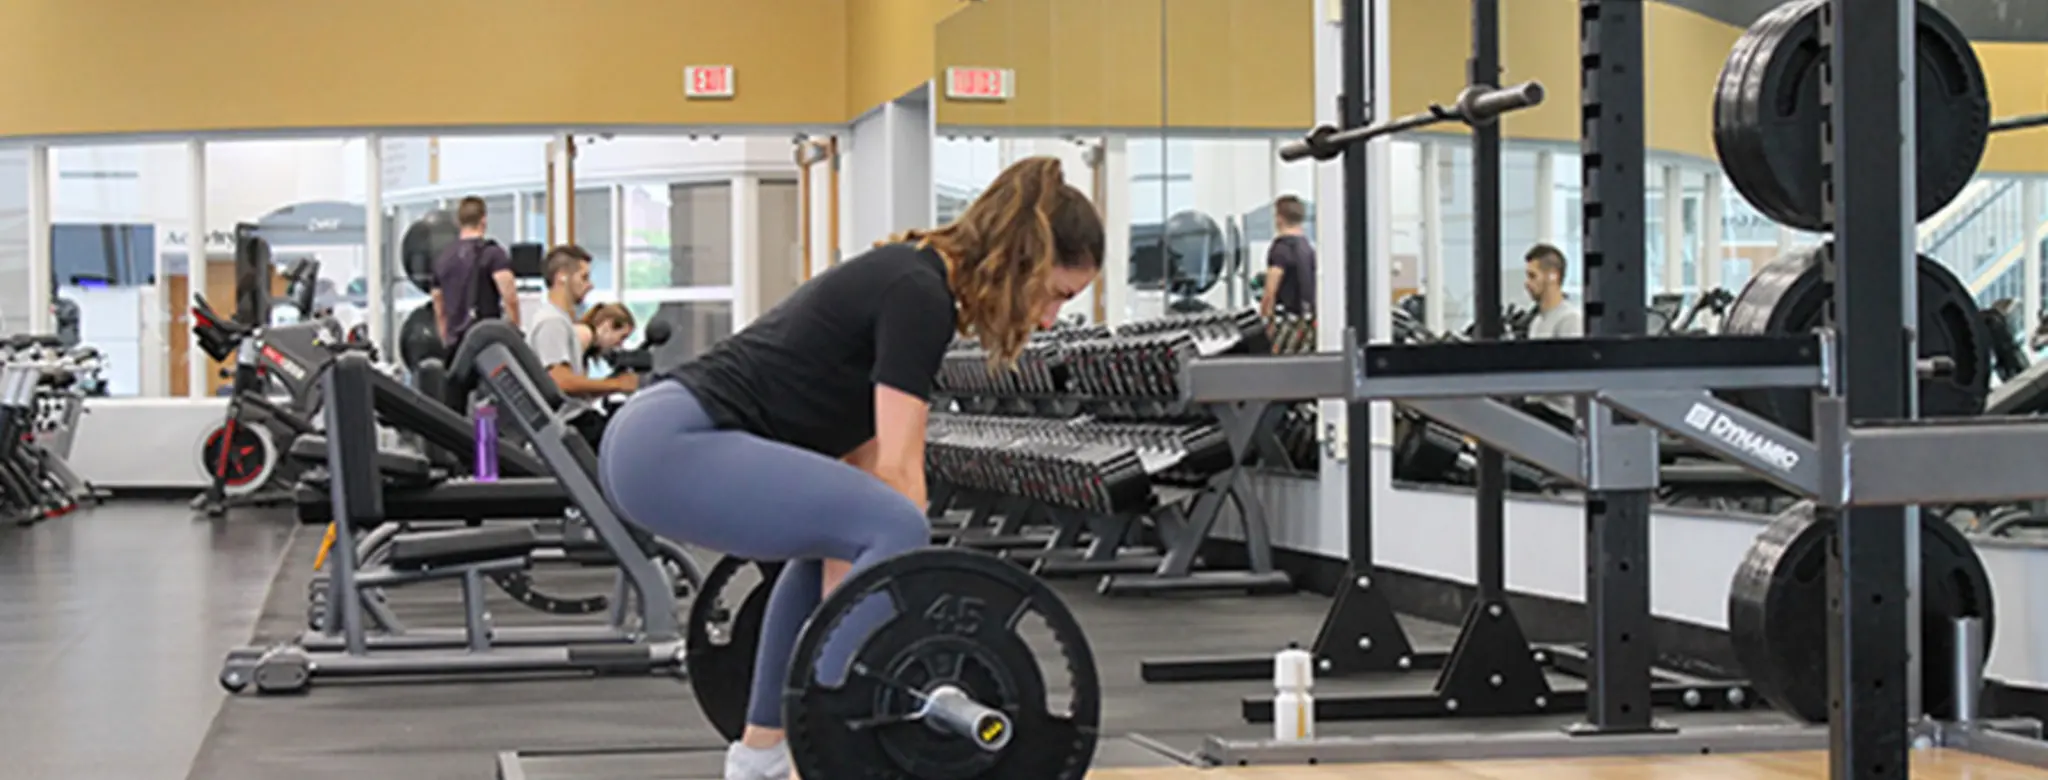 woman lifting weights in gym